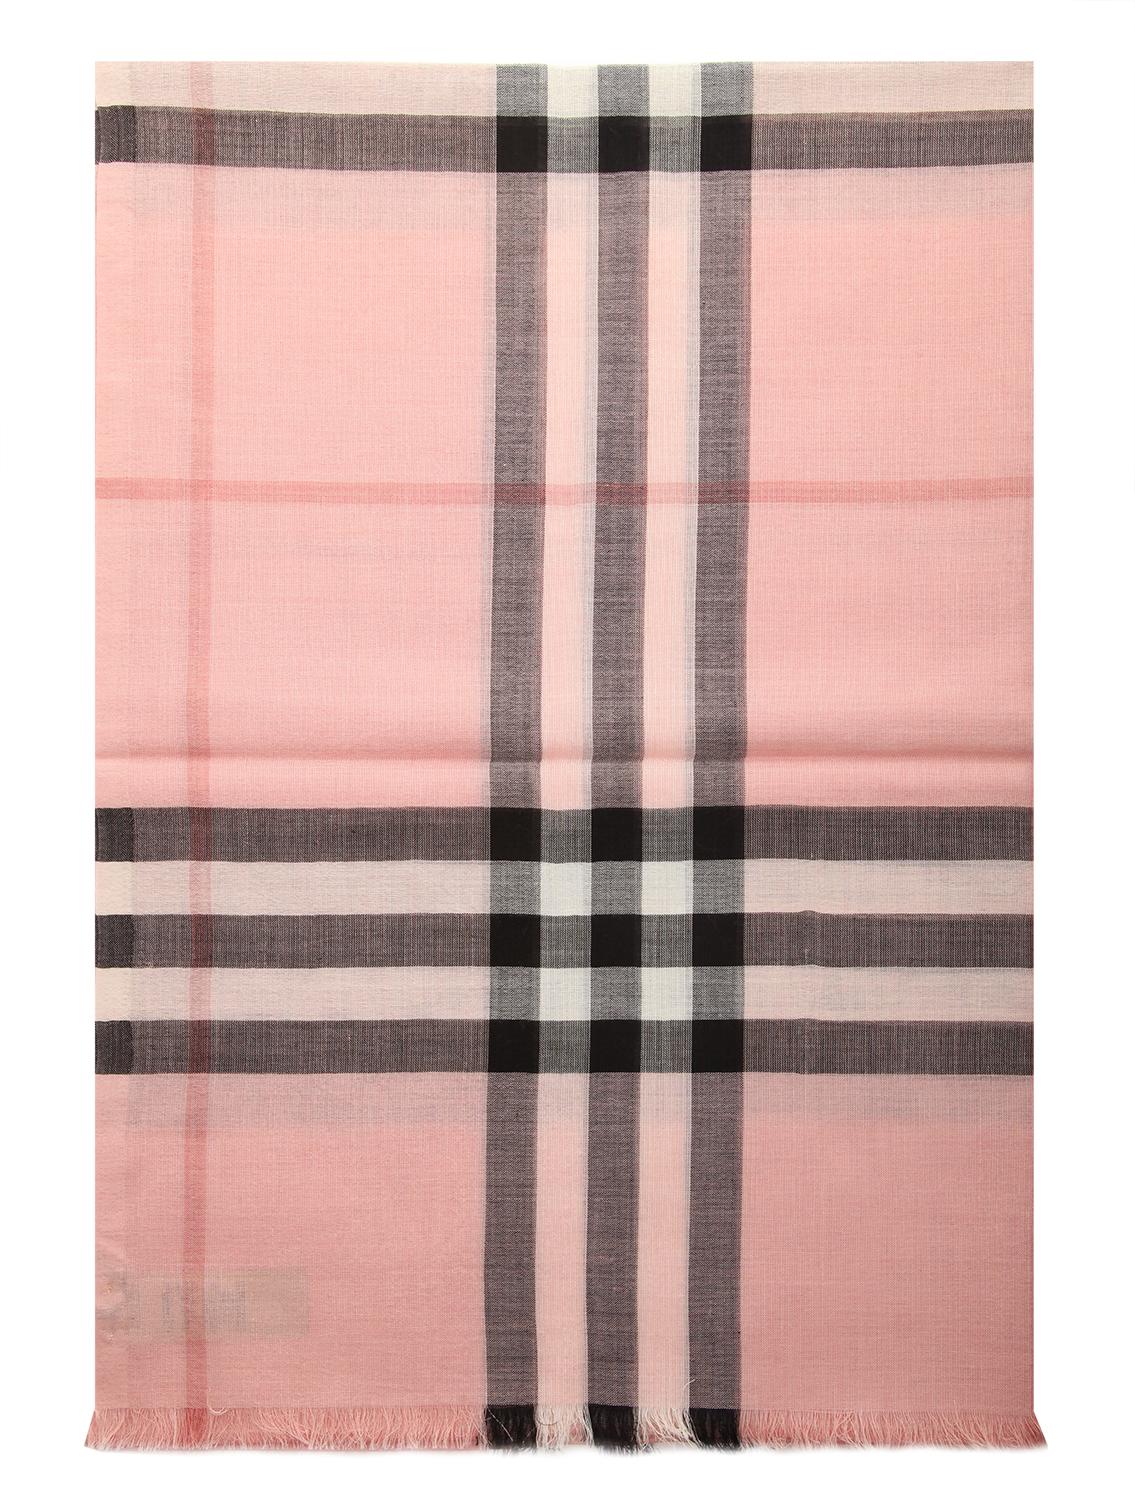 Item number 40013631
Measurements length: 220 cm, width: 70 cm, Color pink-black-beige, Material 51% wool, 49% silk
Washing Specialist dry clean
Weight in grams approx. 90
Features Check Lightweight Scarf with Eyelash fringing at both ends


